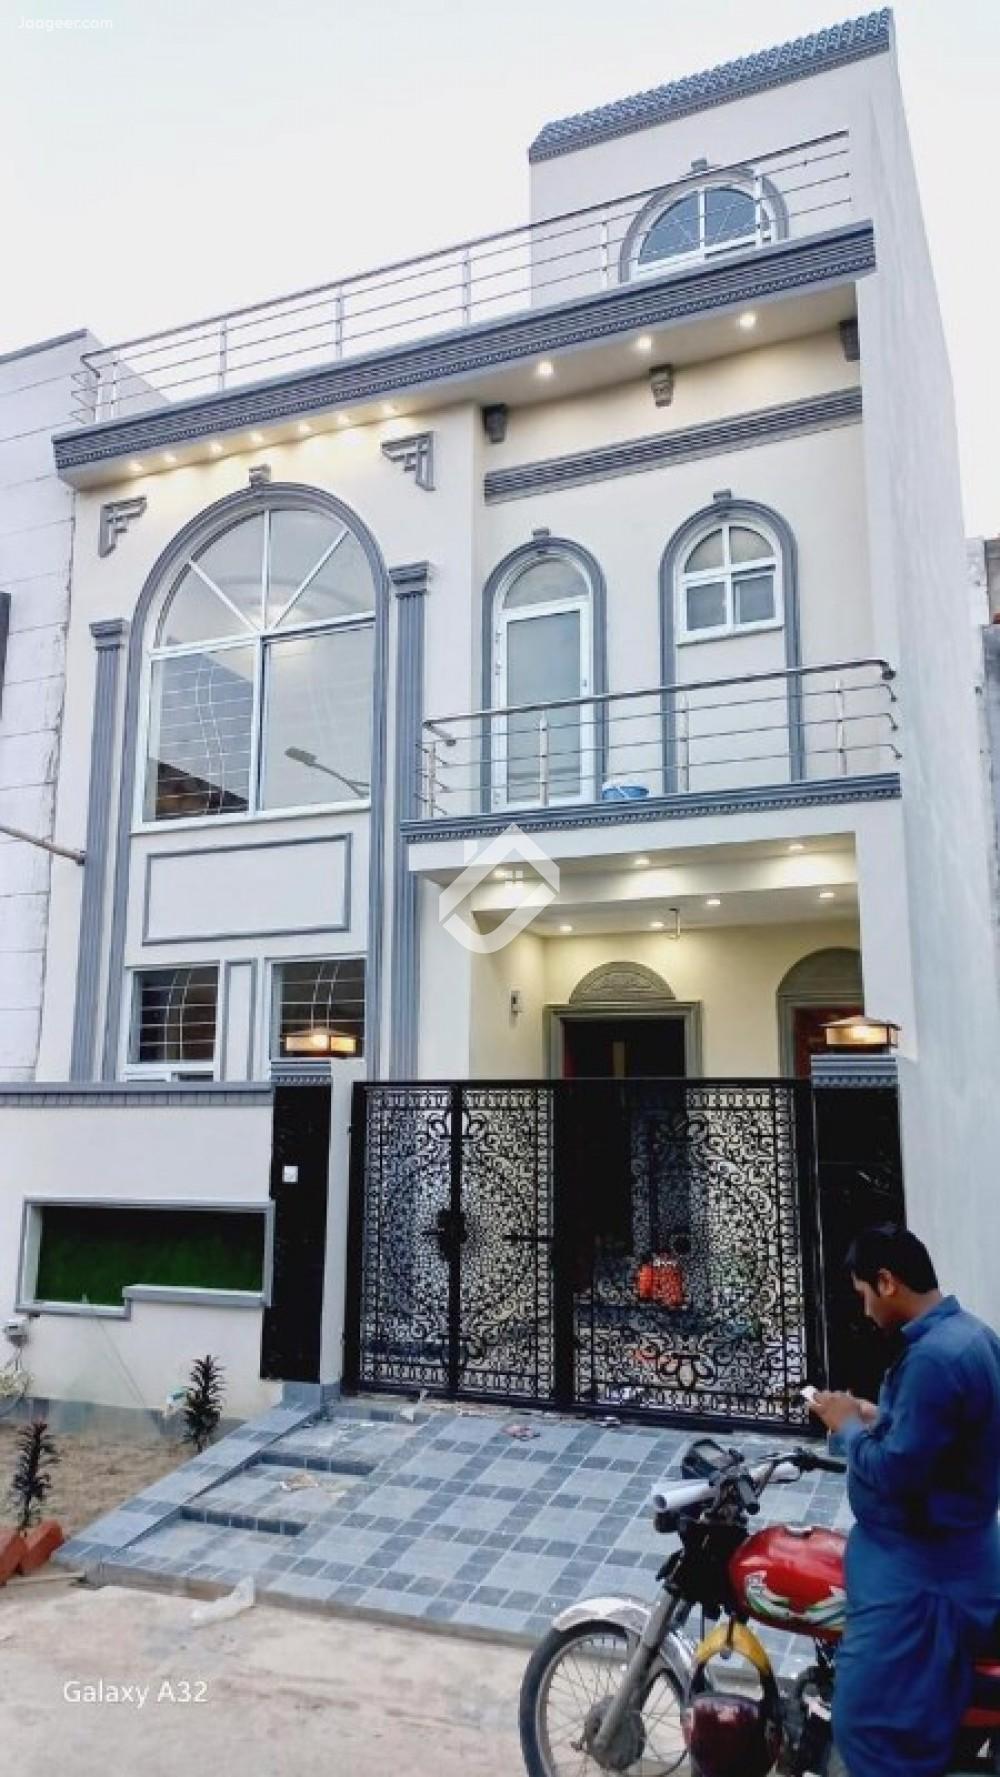 Main image 5 Marla Double Storey House For Sale In New Lahore City --